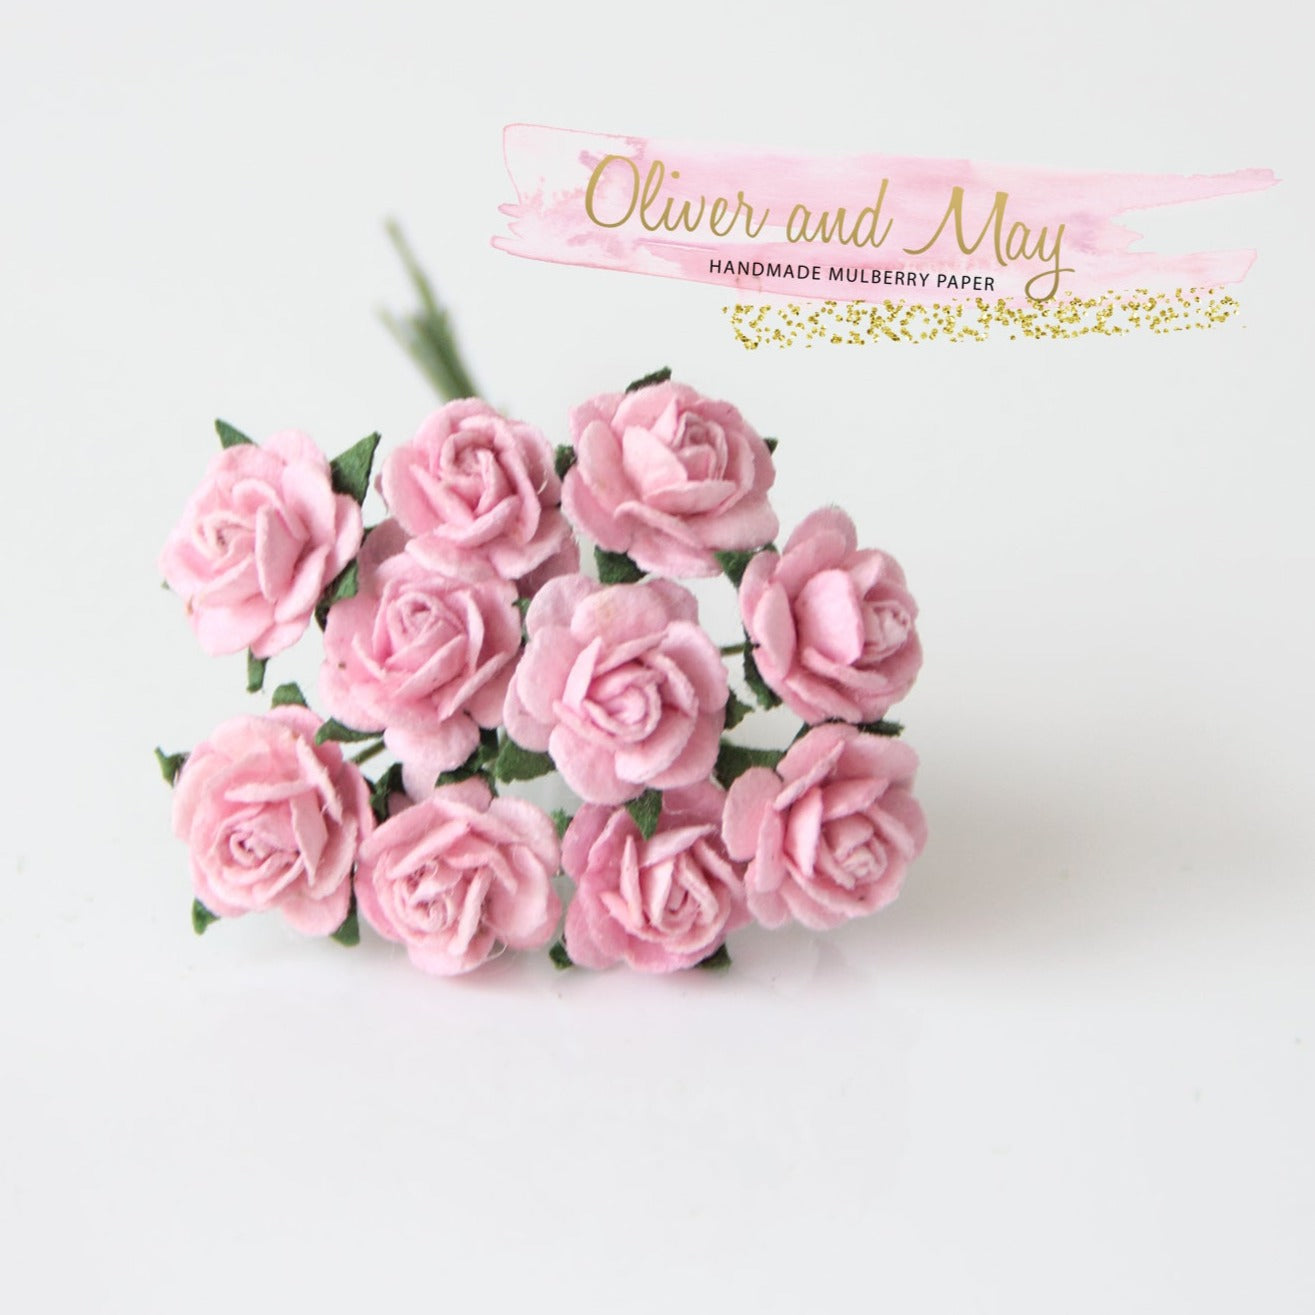 10 Pcs Mulberry Paper Flowers - 1cm Rounded Petal Roses - Soft Pink